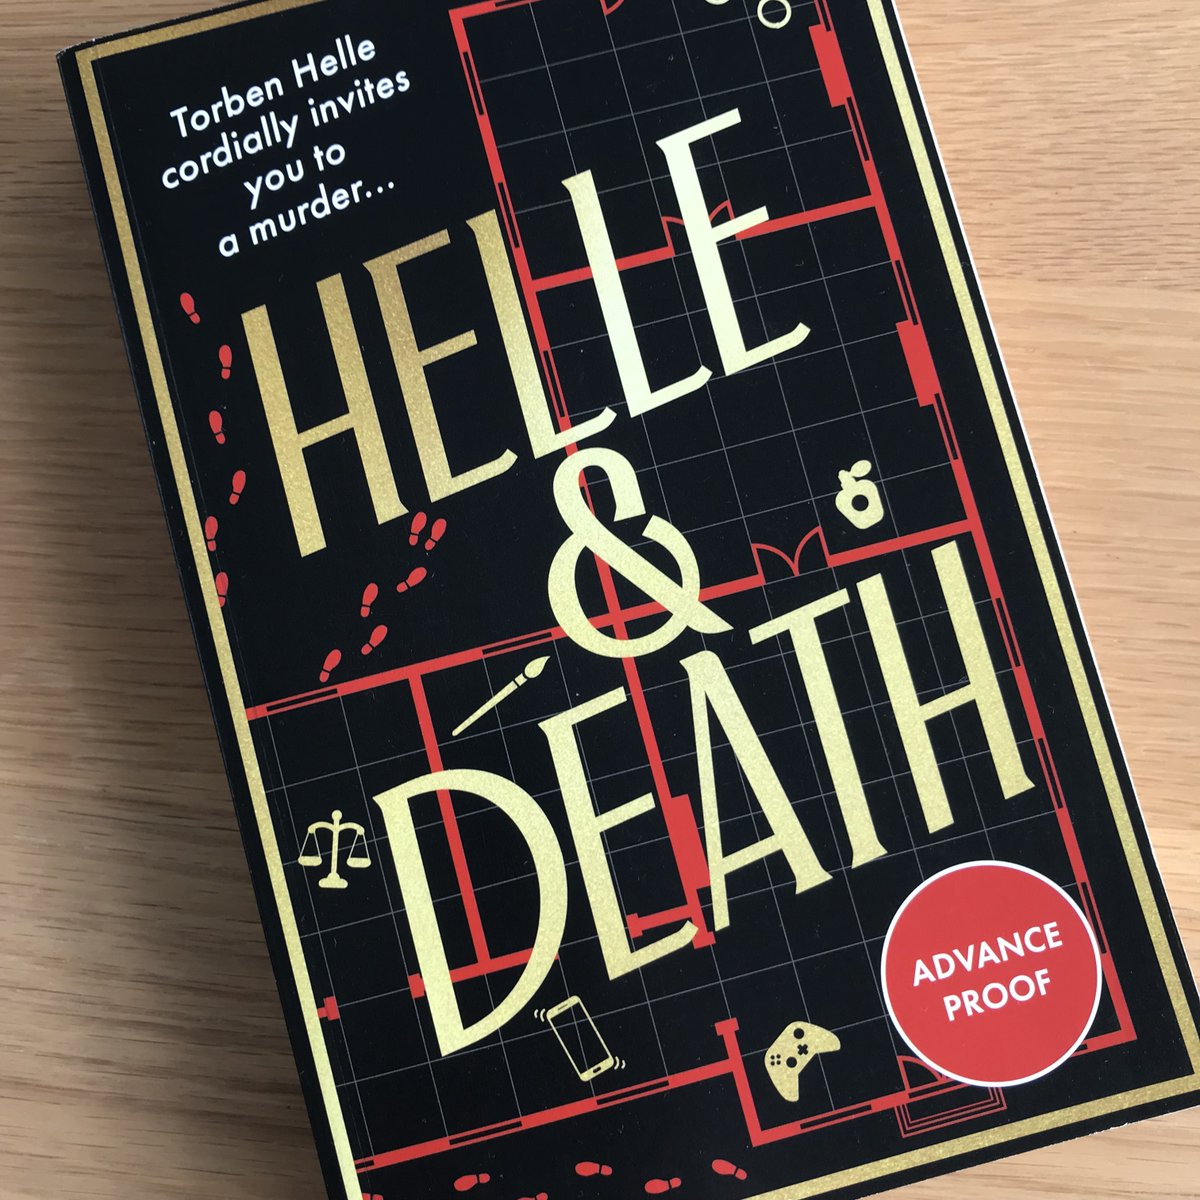 SATURDAY DRAW: Today we're giving away our early copy of Helle & Death by @OskarCoxJensen - be in it to win it: facebook.com/CrimeFictionLo…